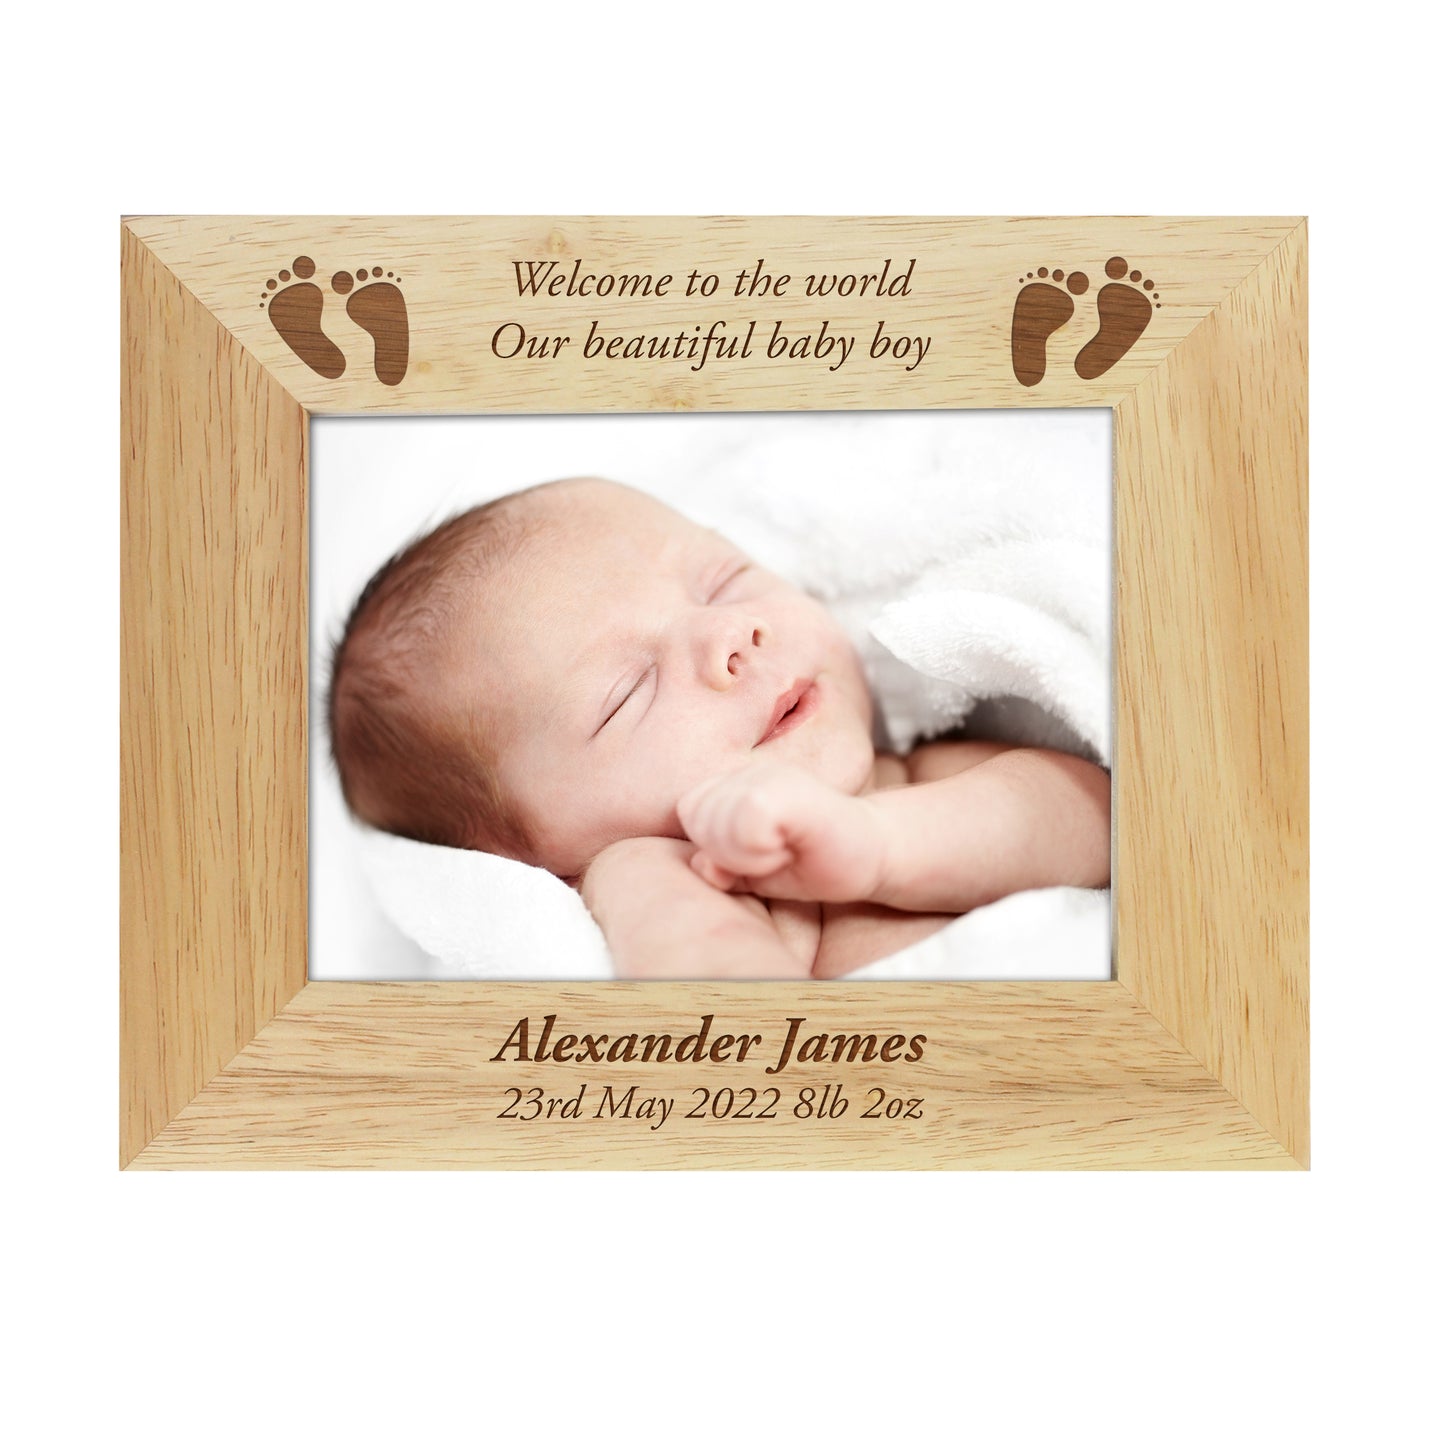 Personalised Baby Feet 7x5 Landscape Wooden Photo Frame - Personalise It!